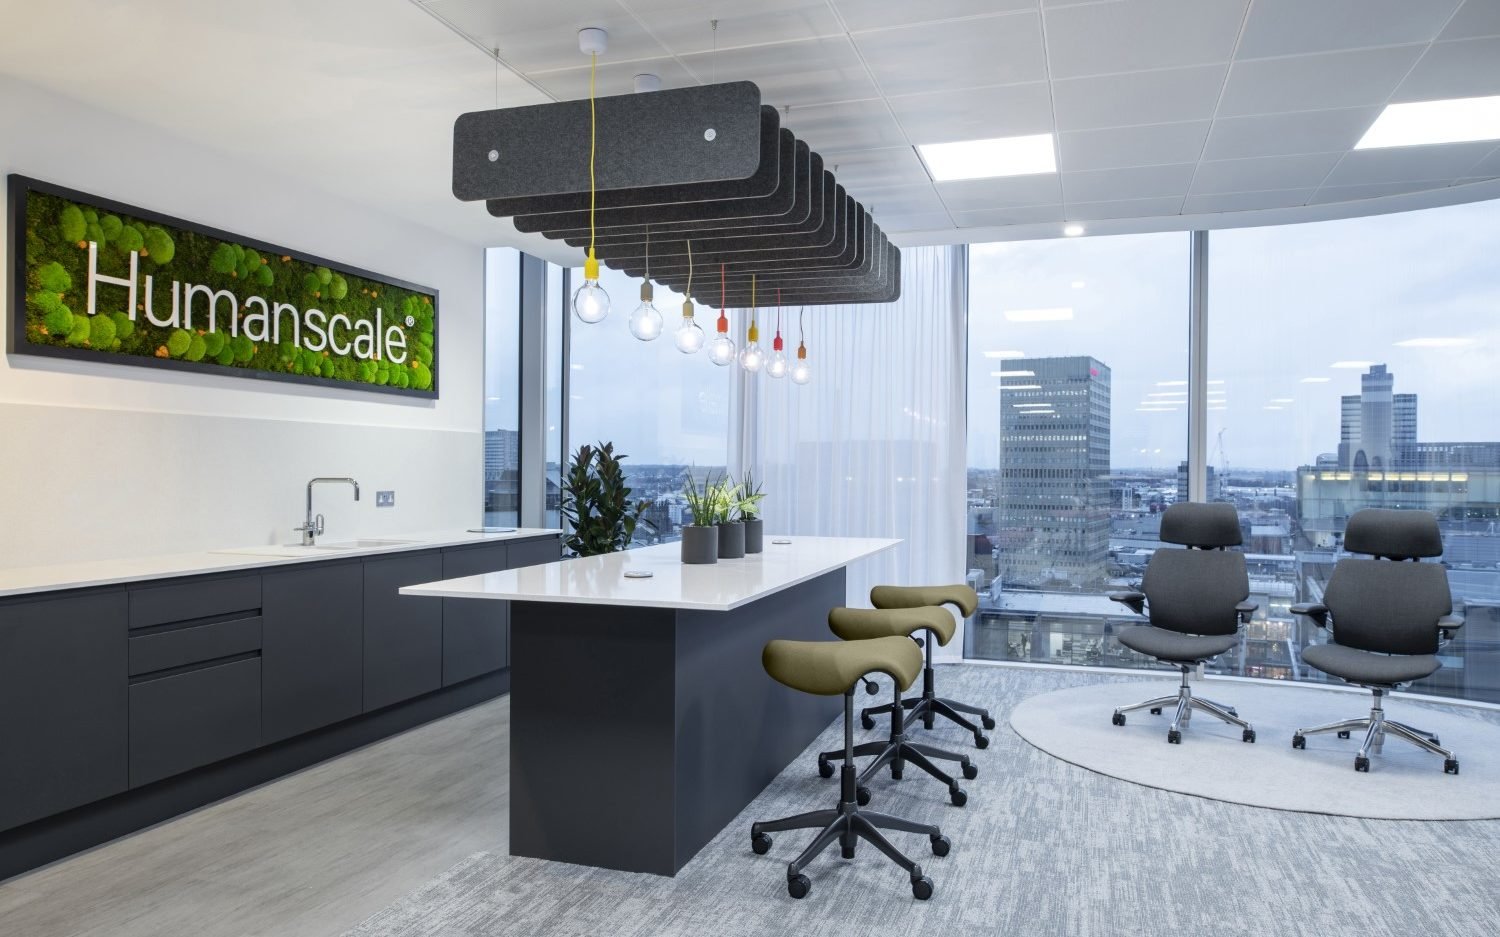 Humanscale Opens New Showroom in Manchester